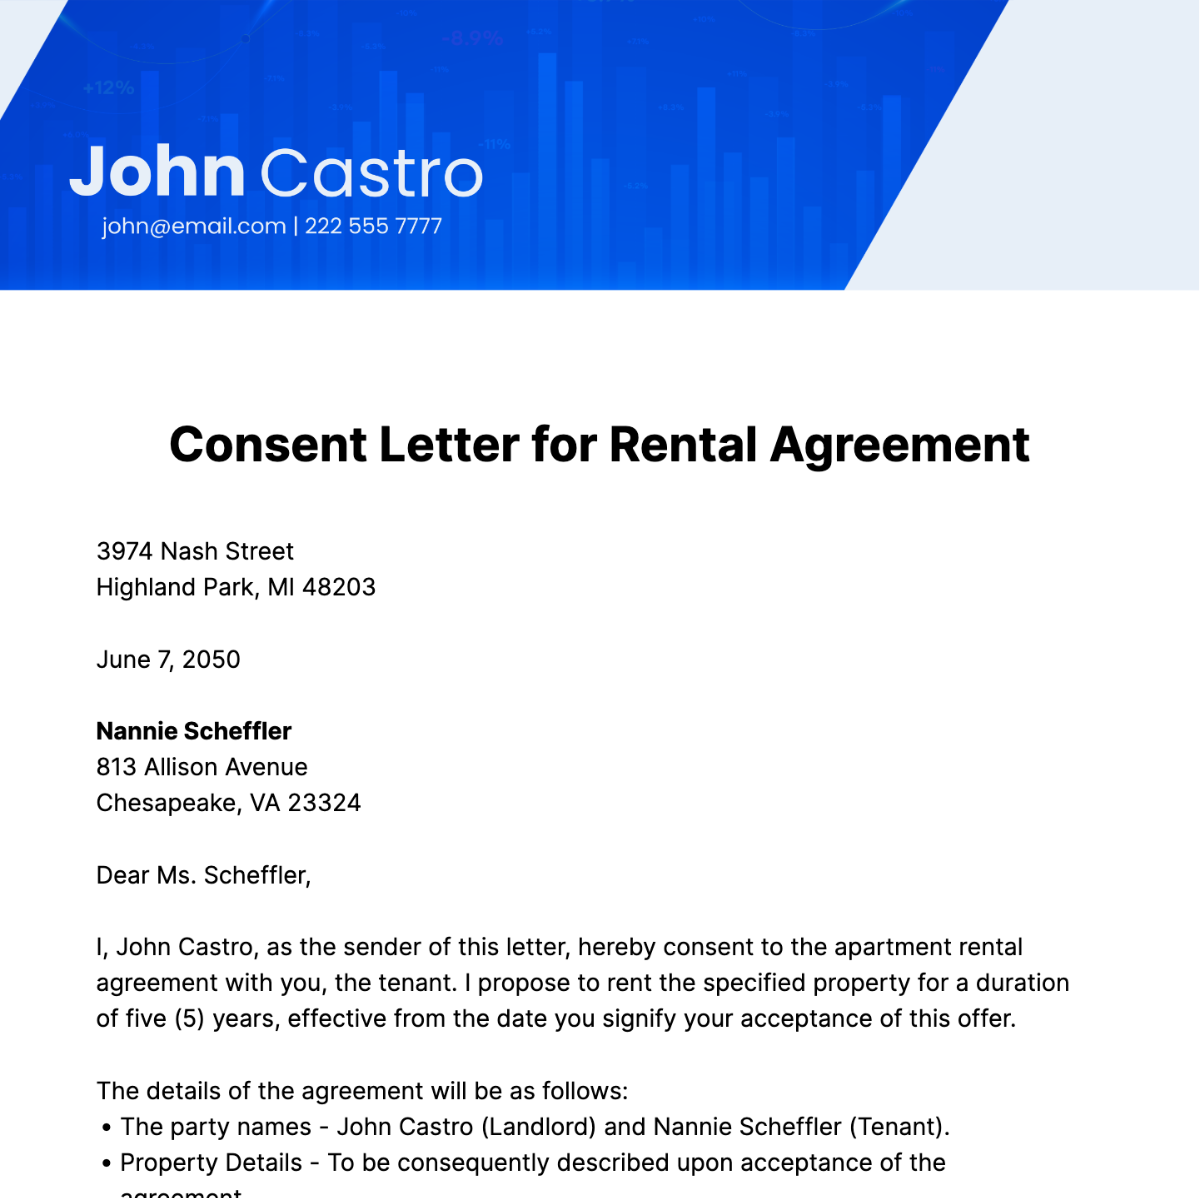 Consent Letter for Rental Agreement Template